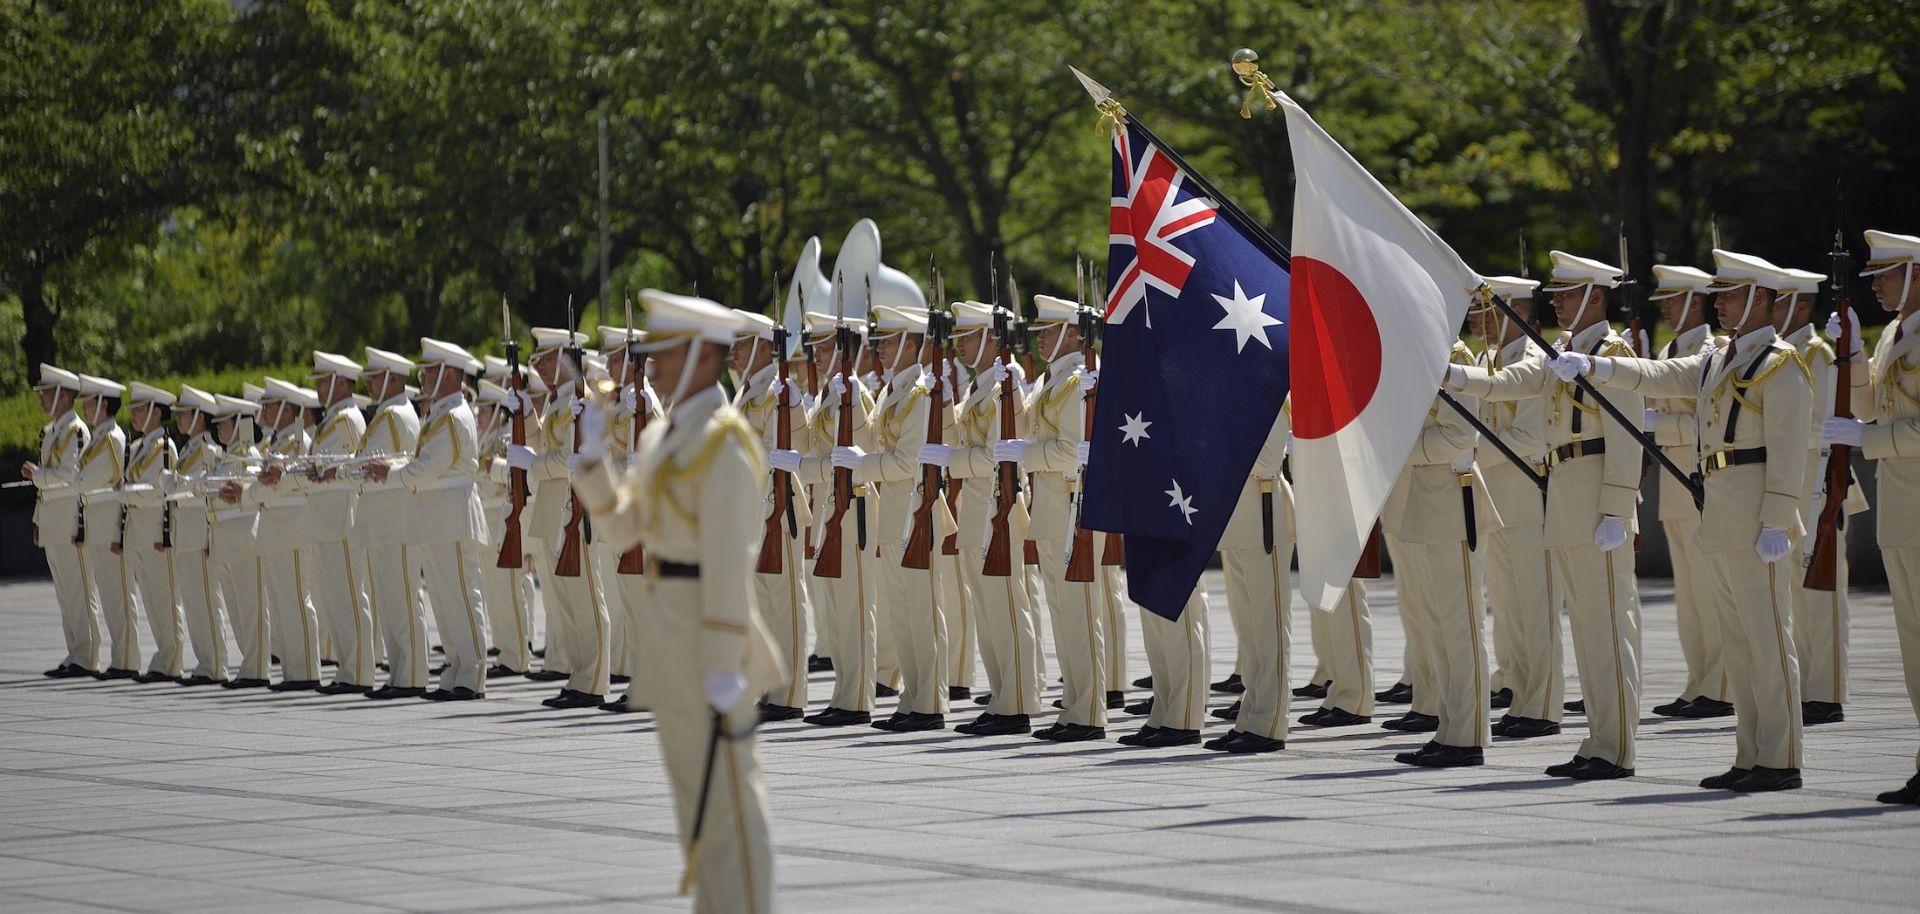 A Japanese honor guard welcomes the Australian defense minister during a visit in August 2016.